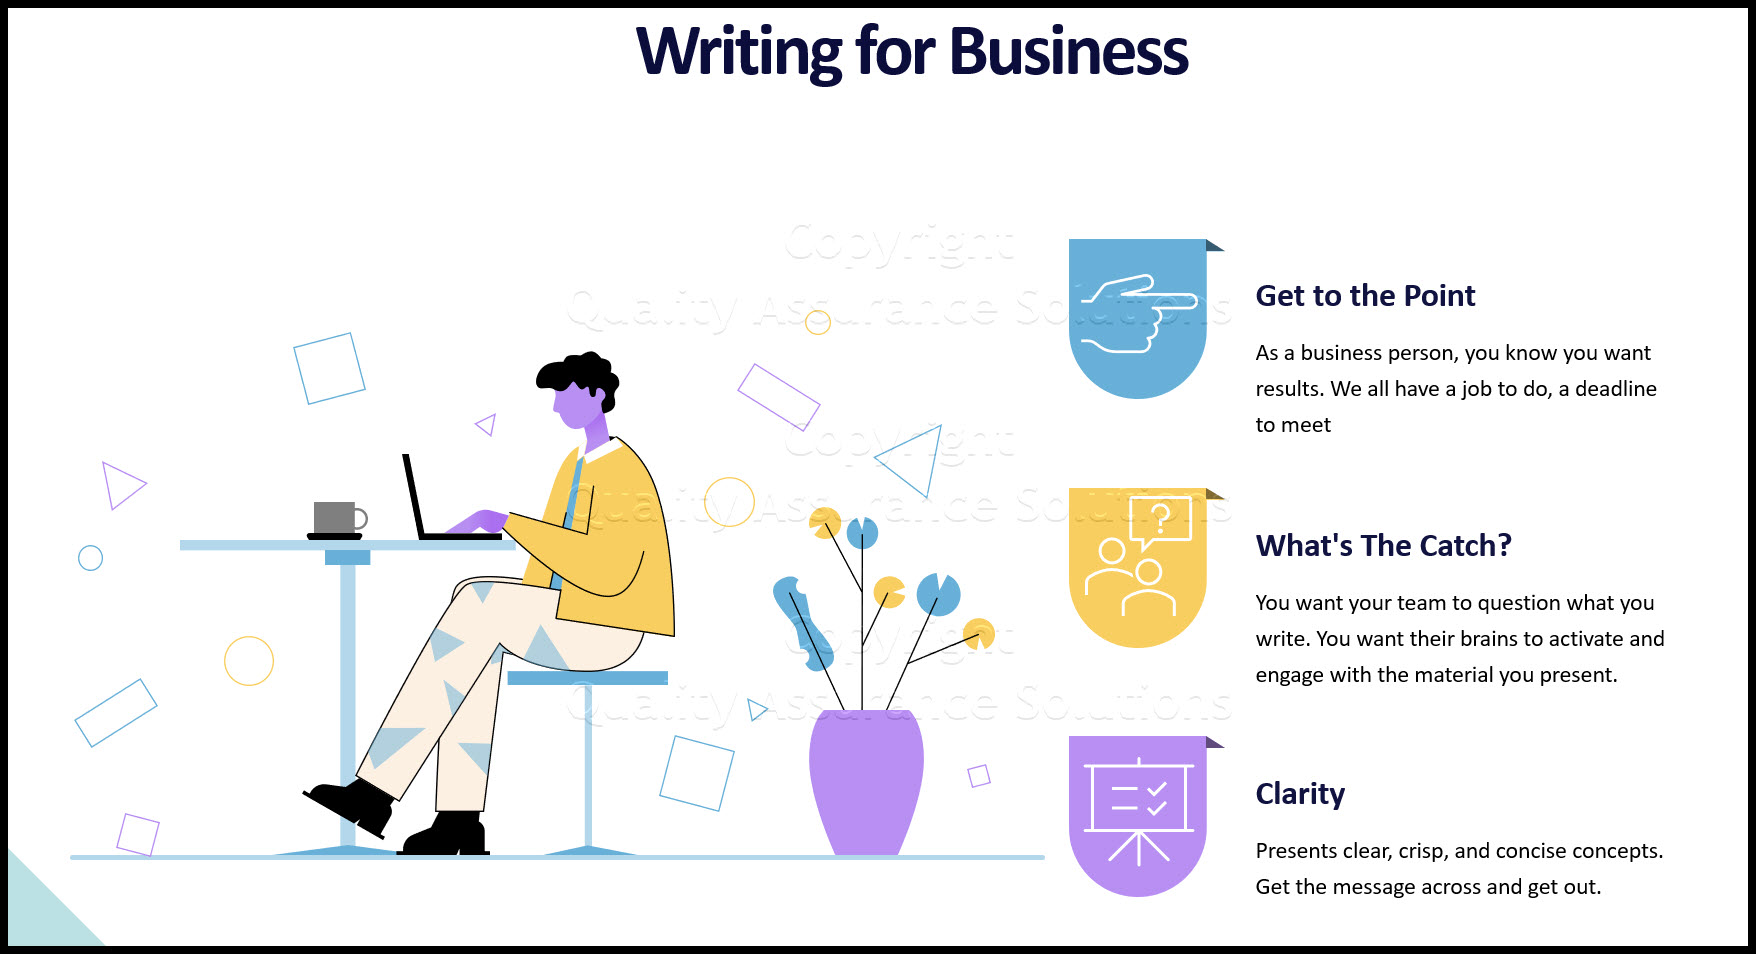 Why good business writing is impossible for most businesses. Take all your written communications to the next level.